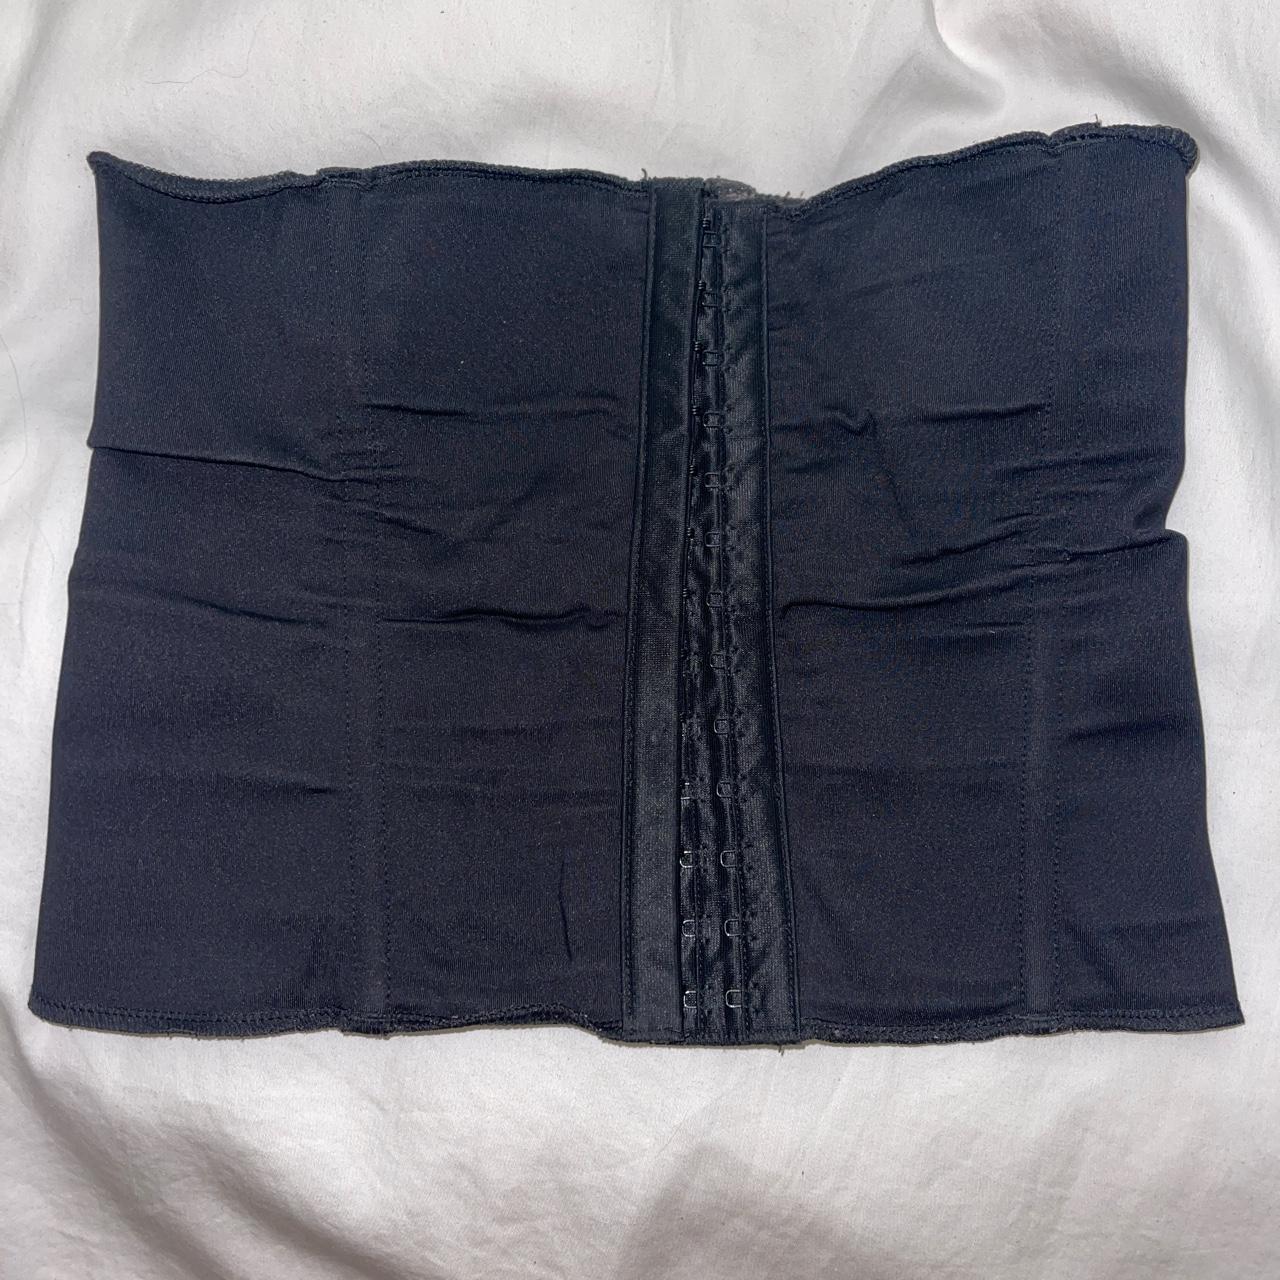 Skims XS waist trainer. Has been worn but there are